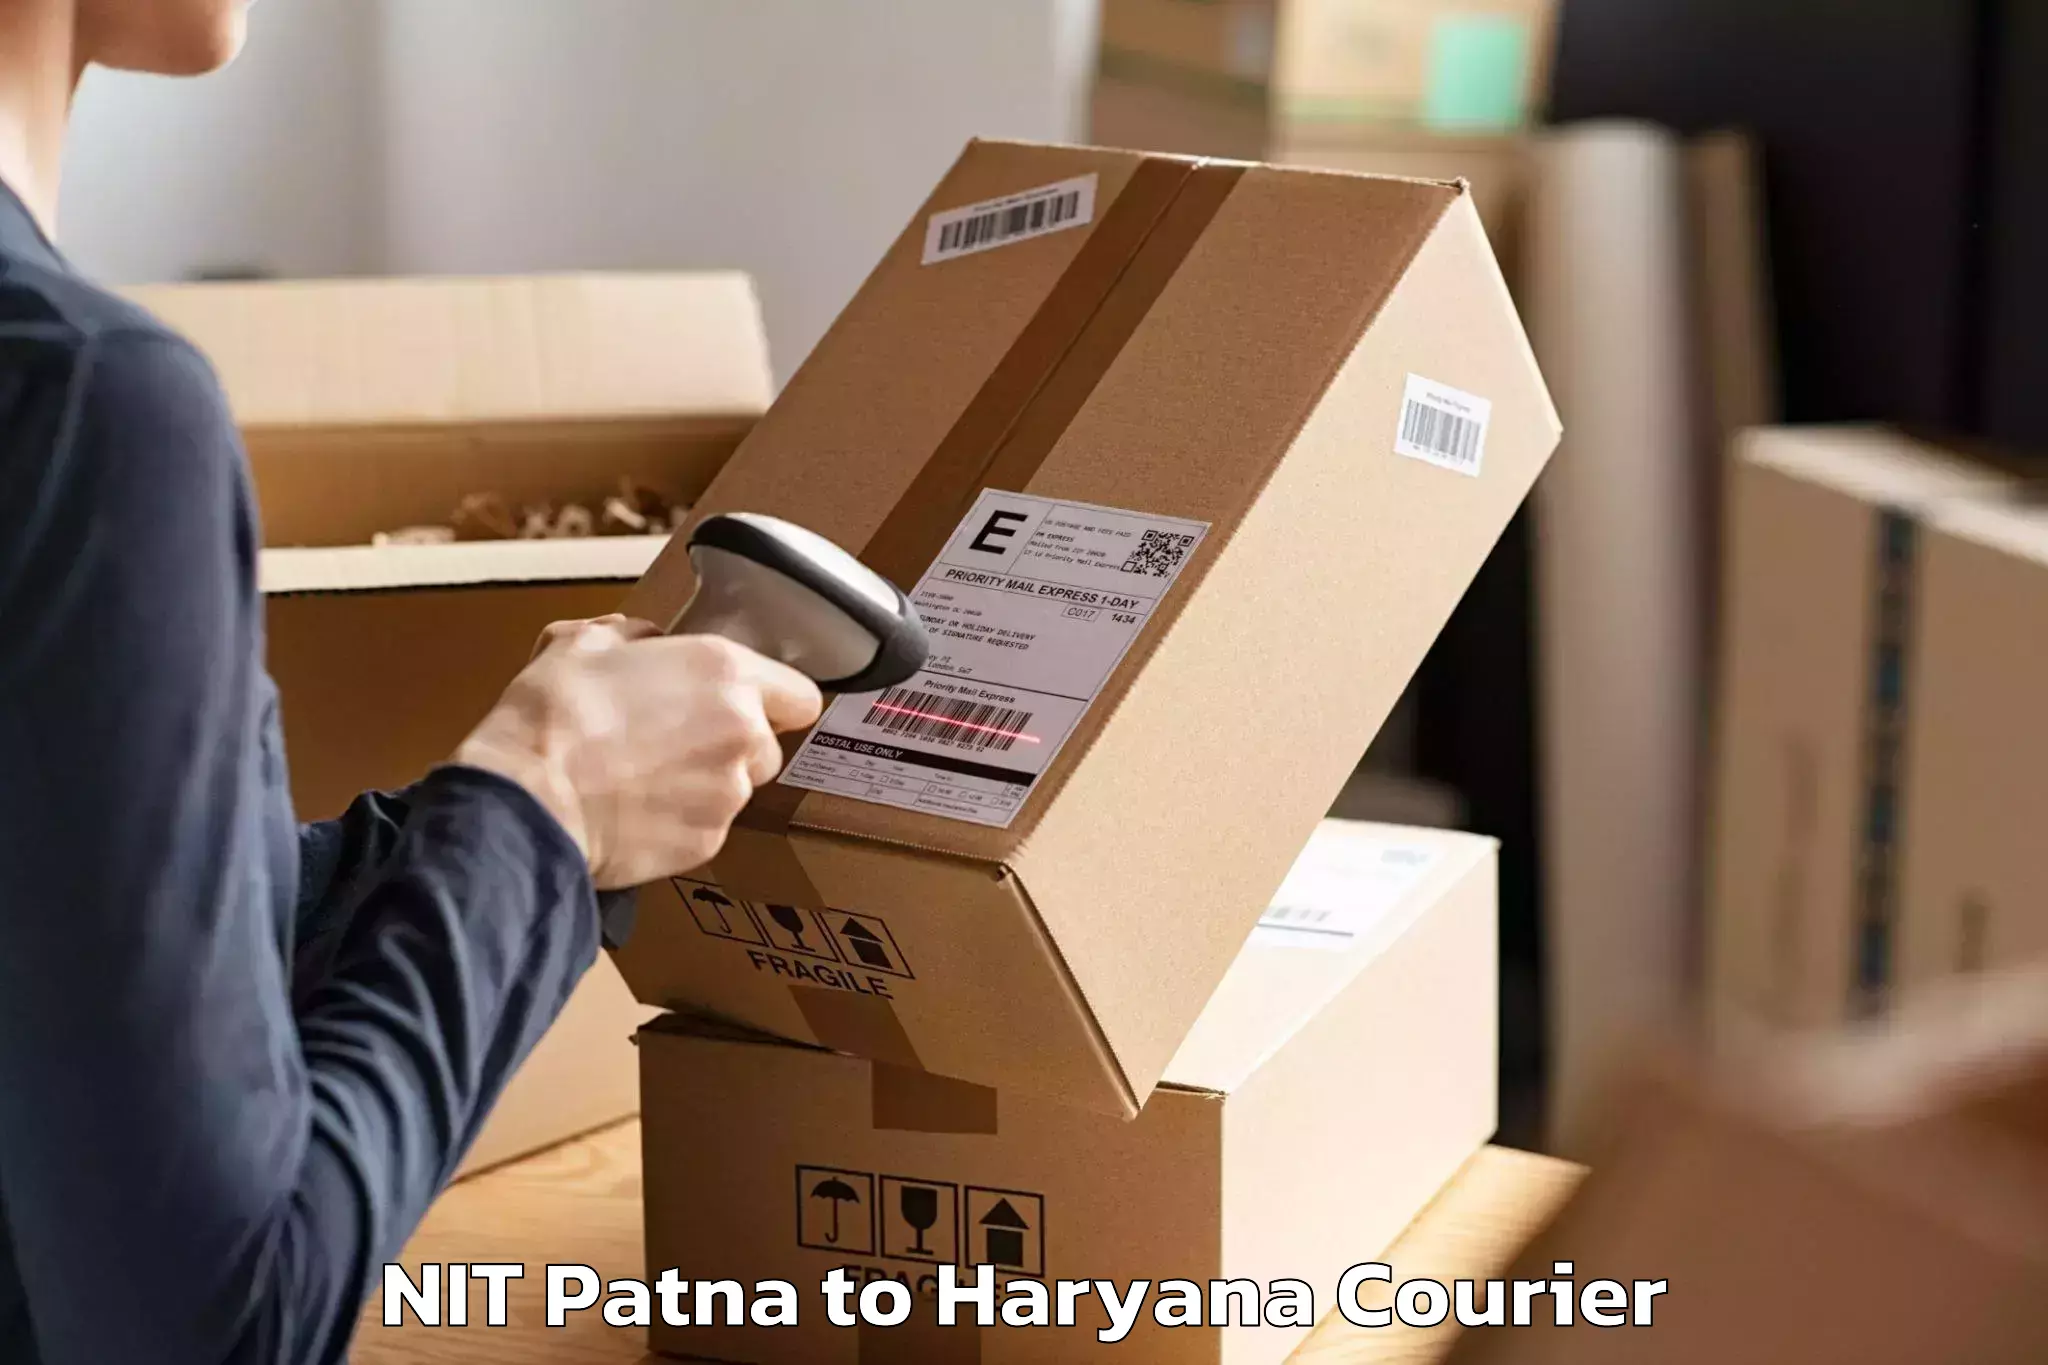 Dependable moving services NIT Patna to Dharuhera